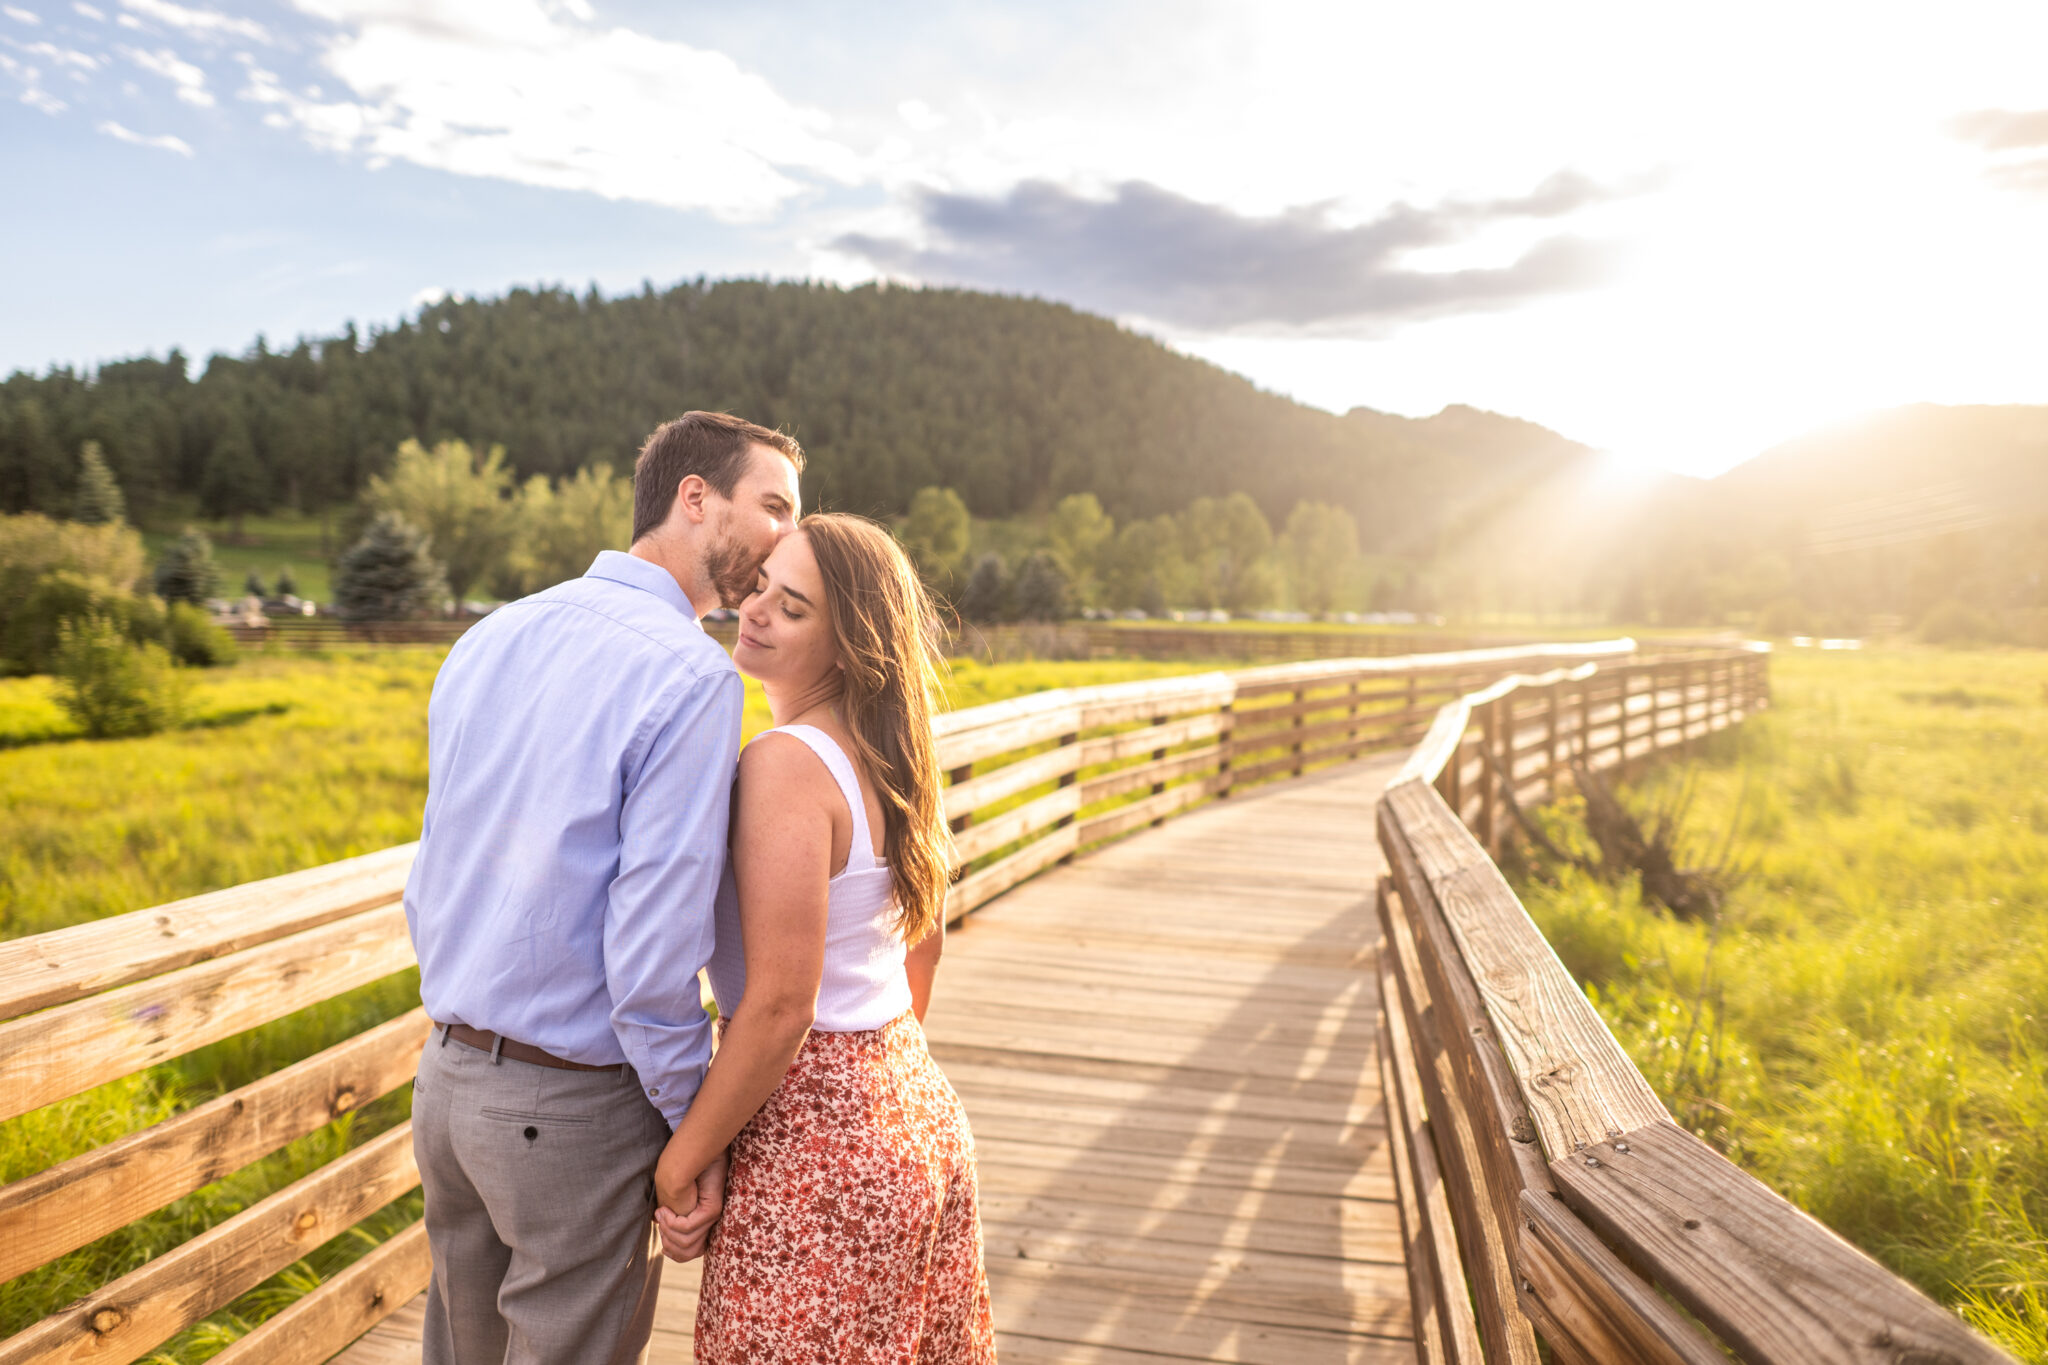 Alice and Joe kiss during an engagement photo shoot at Evergreen Lake in Evergreen, Colorado.